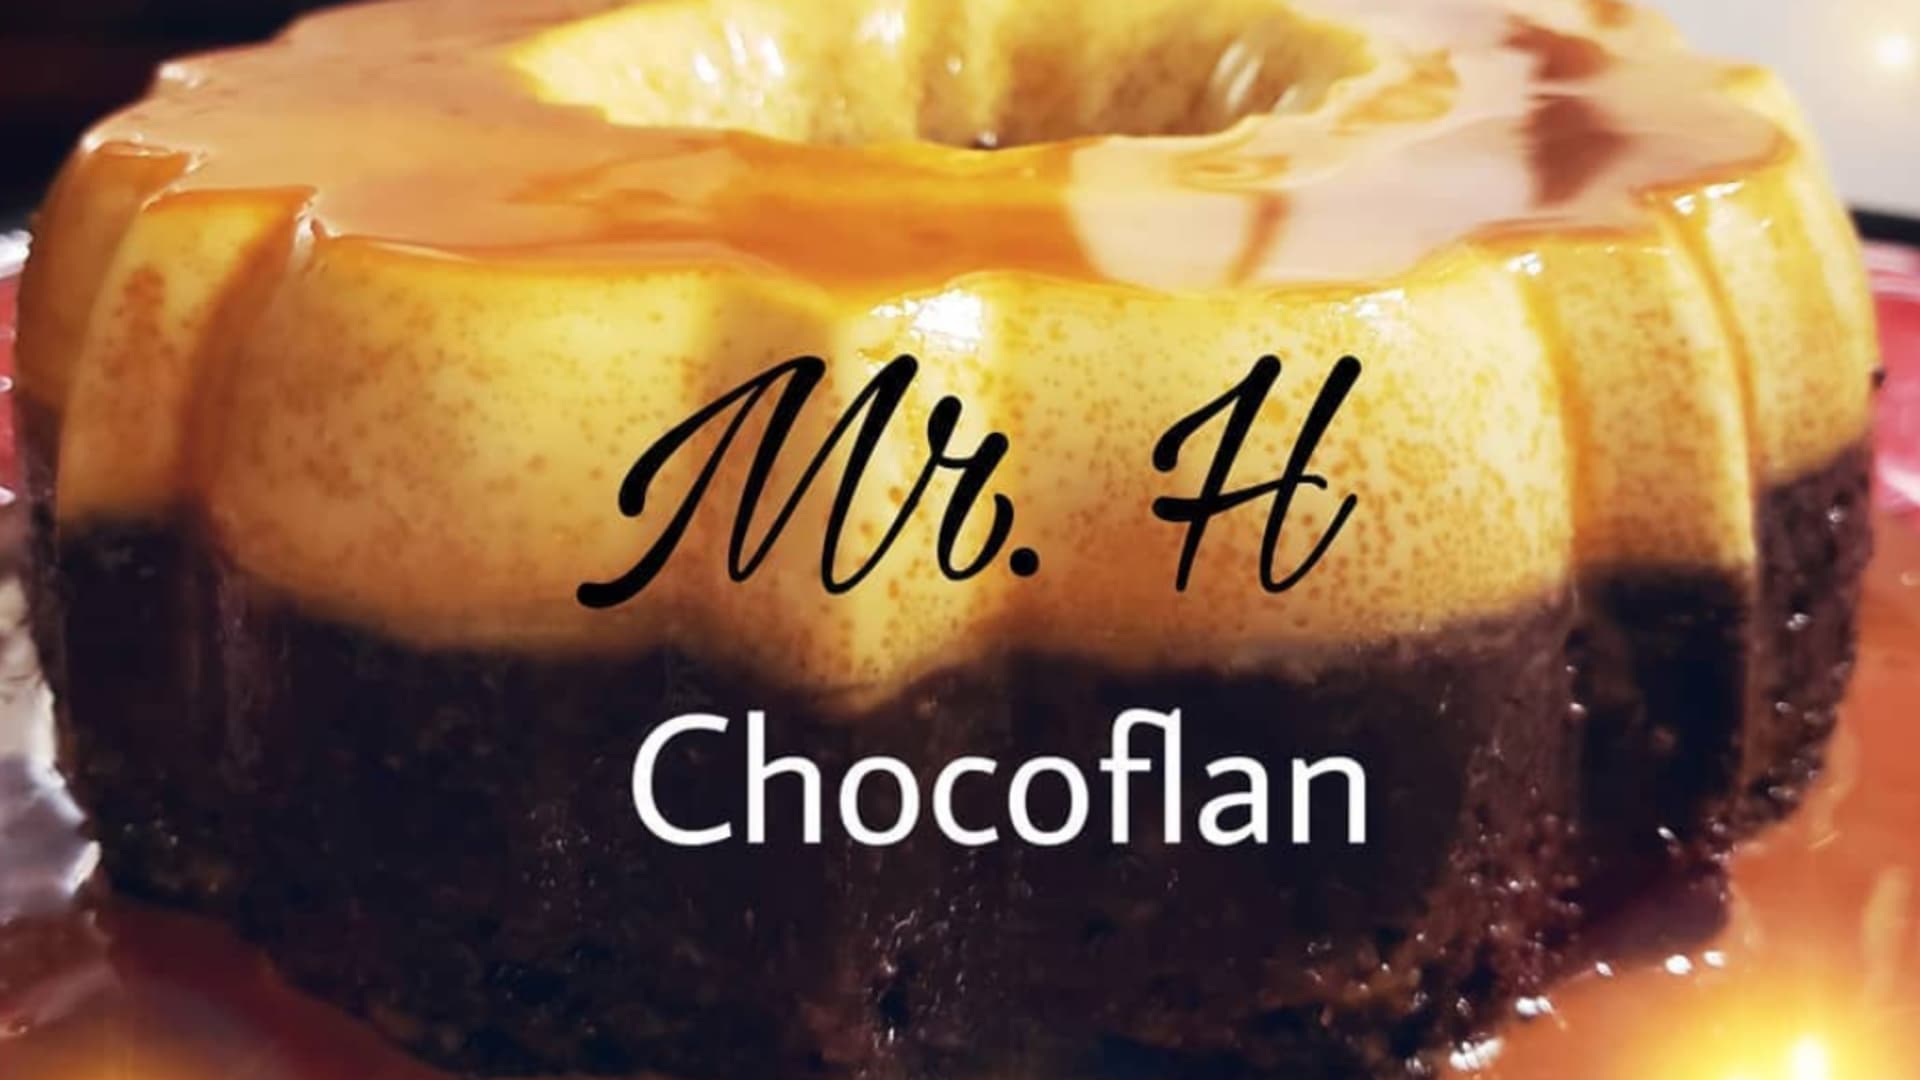 Anna Flores and Higinio Garcia were able to start a baking business, Mr. H Chocoflan, in part due to the payment pause.